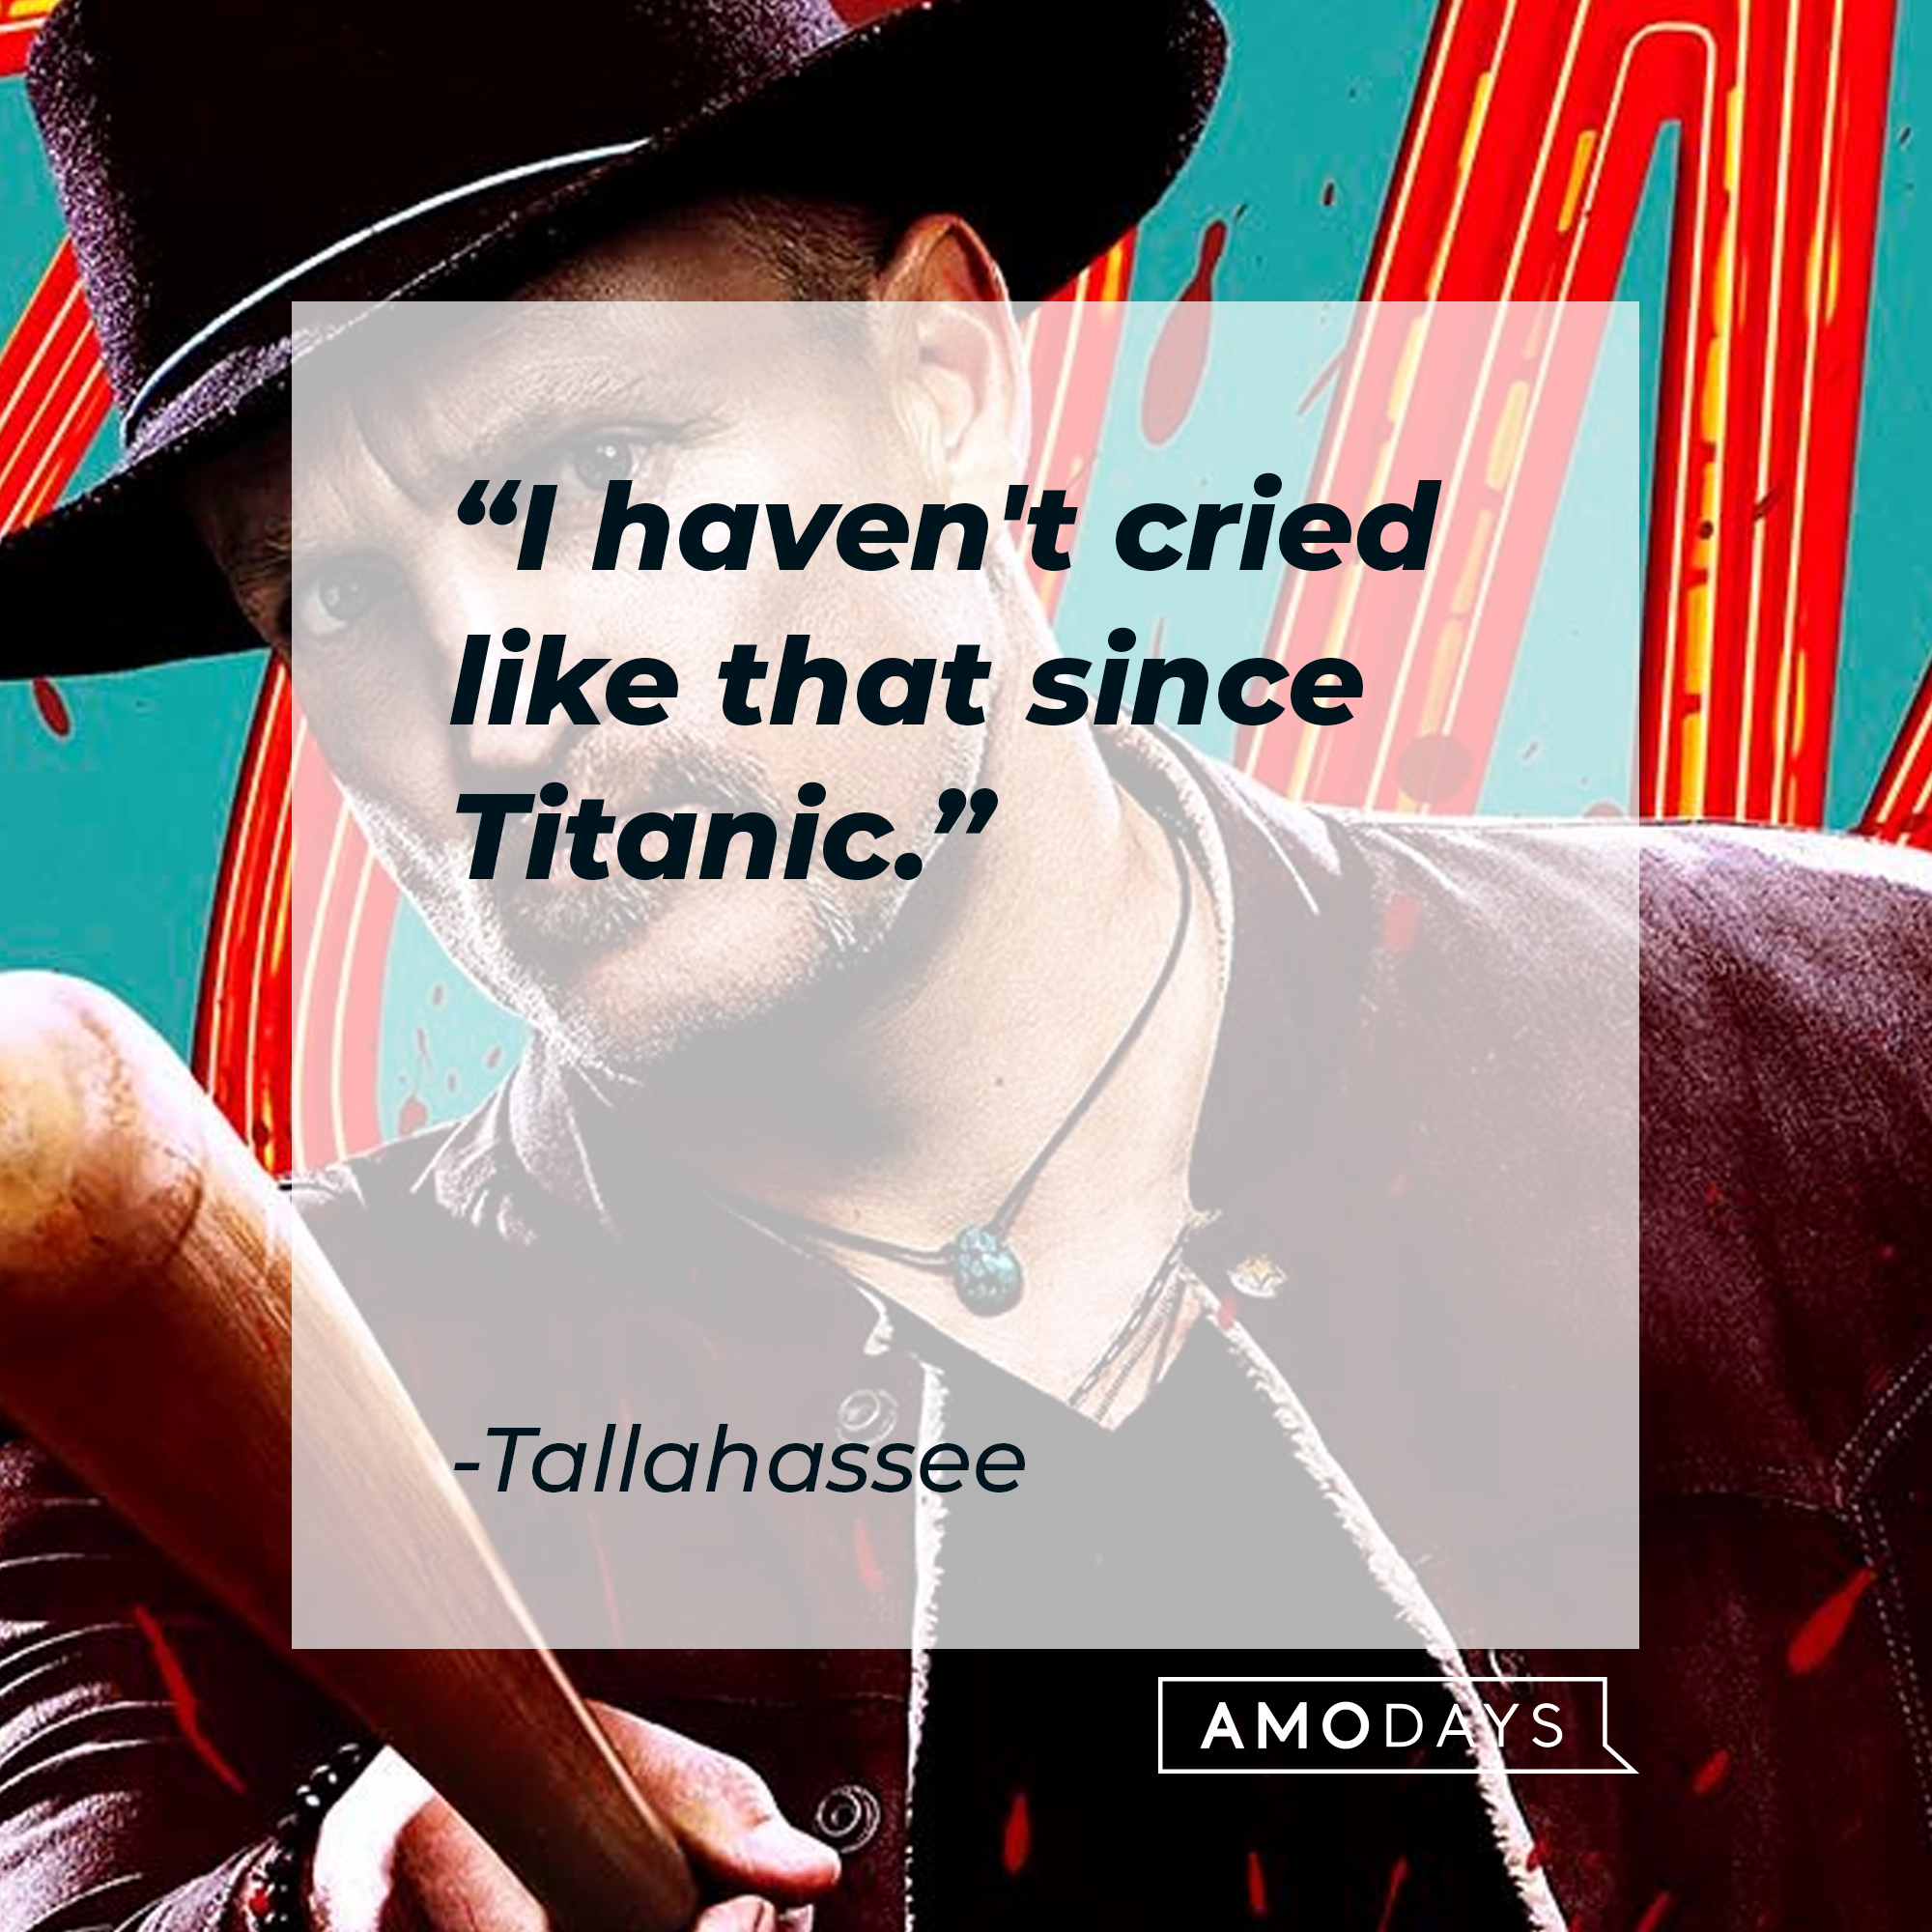 Tallahassee's quote: "I haven't cried like that since Titanic." | Source: Facebook.com/Zombieland